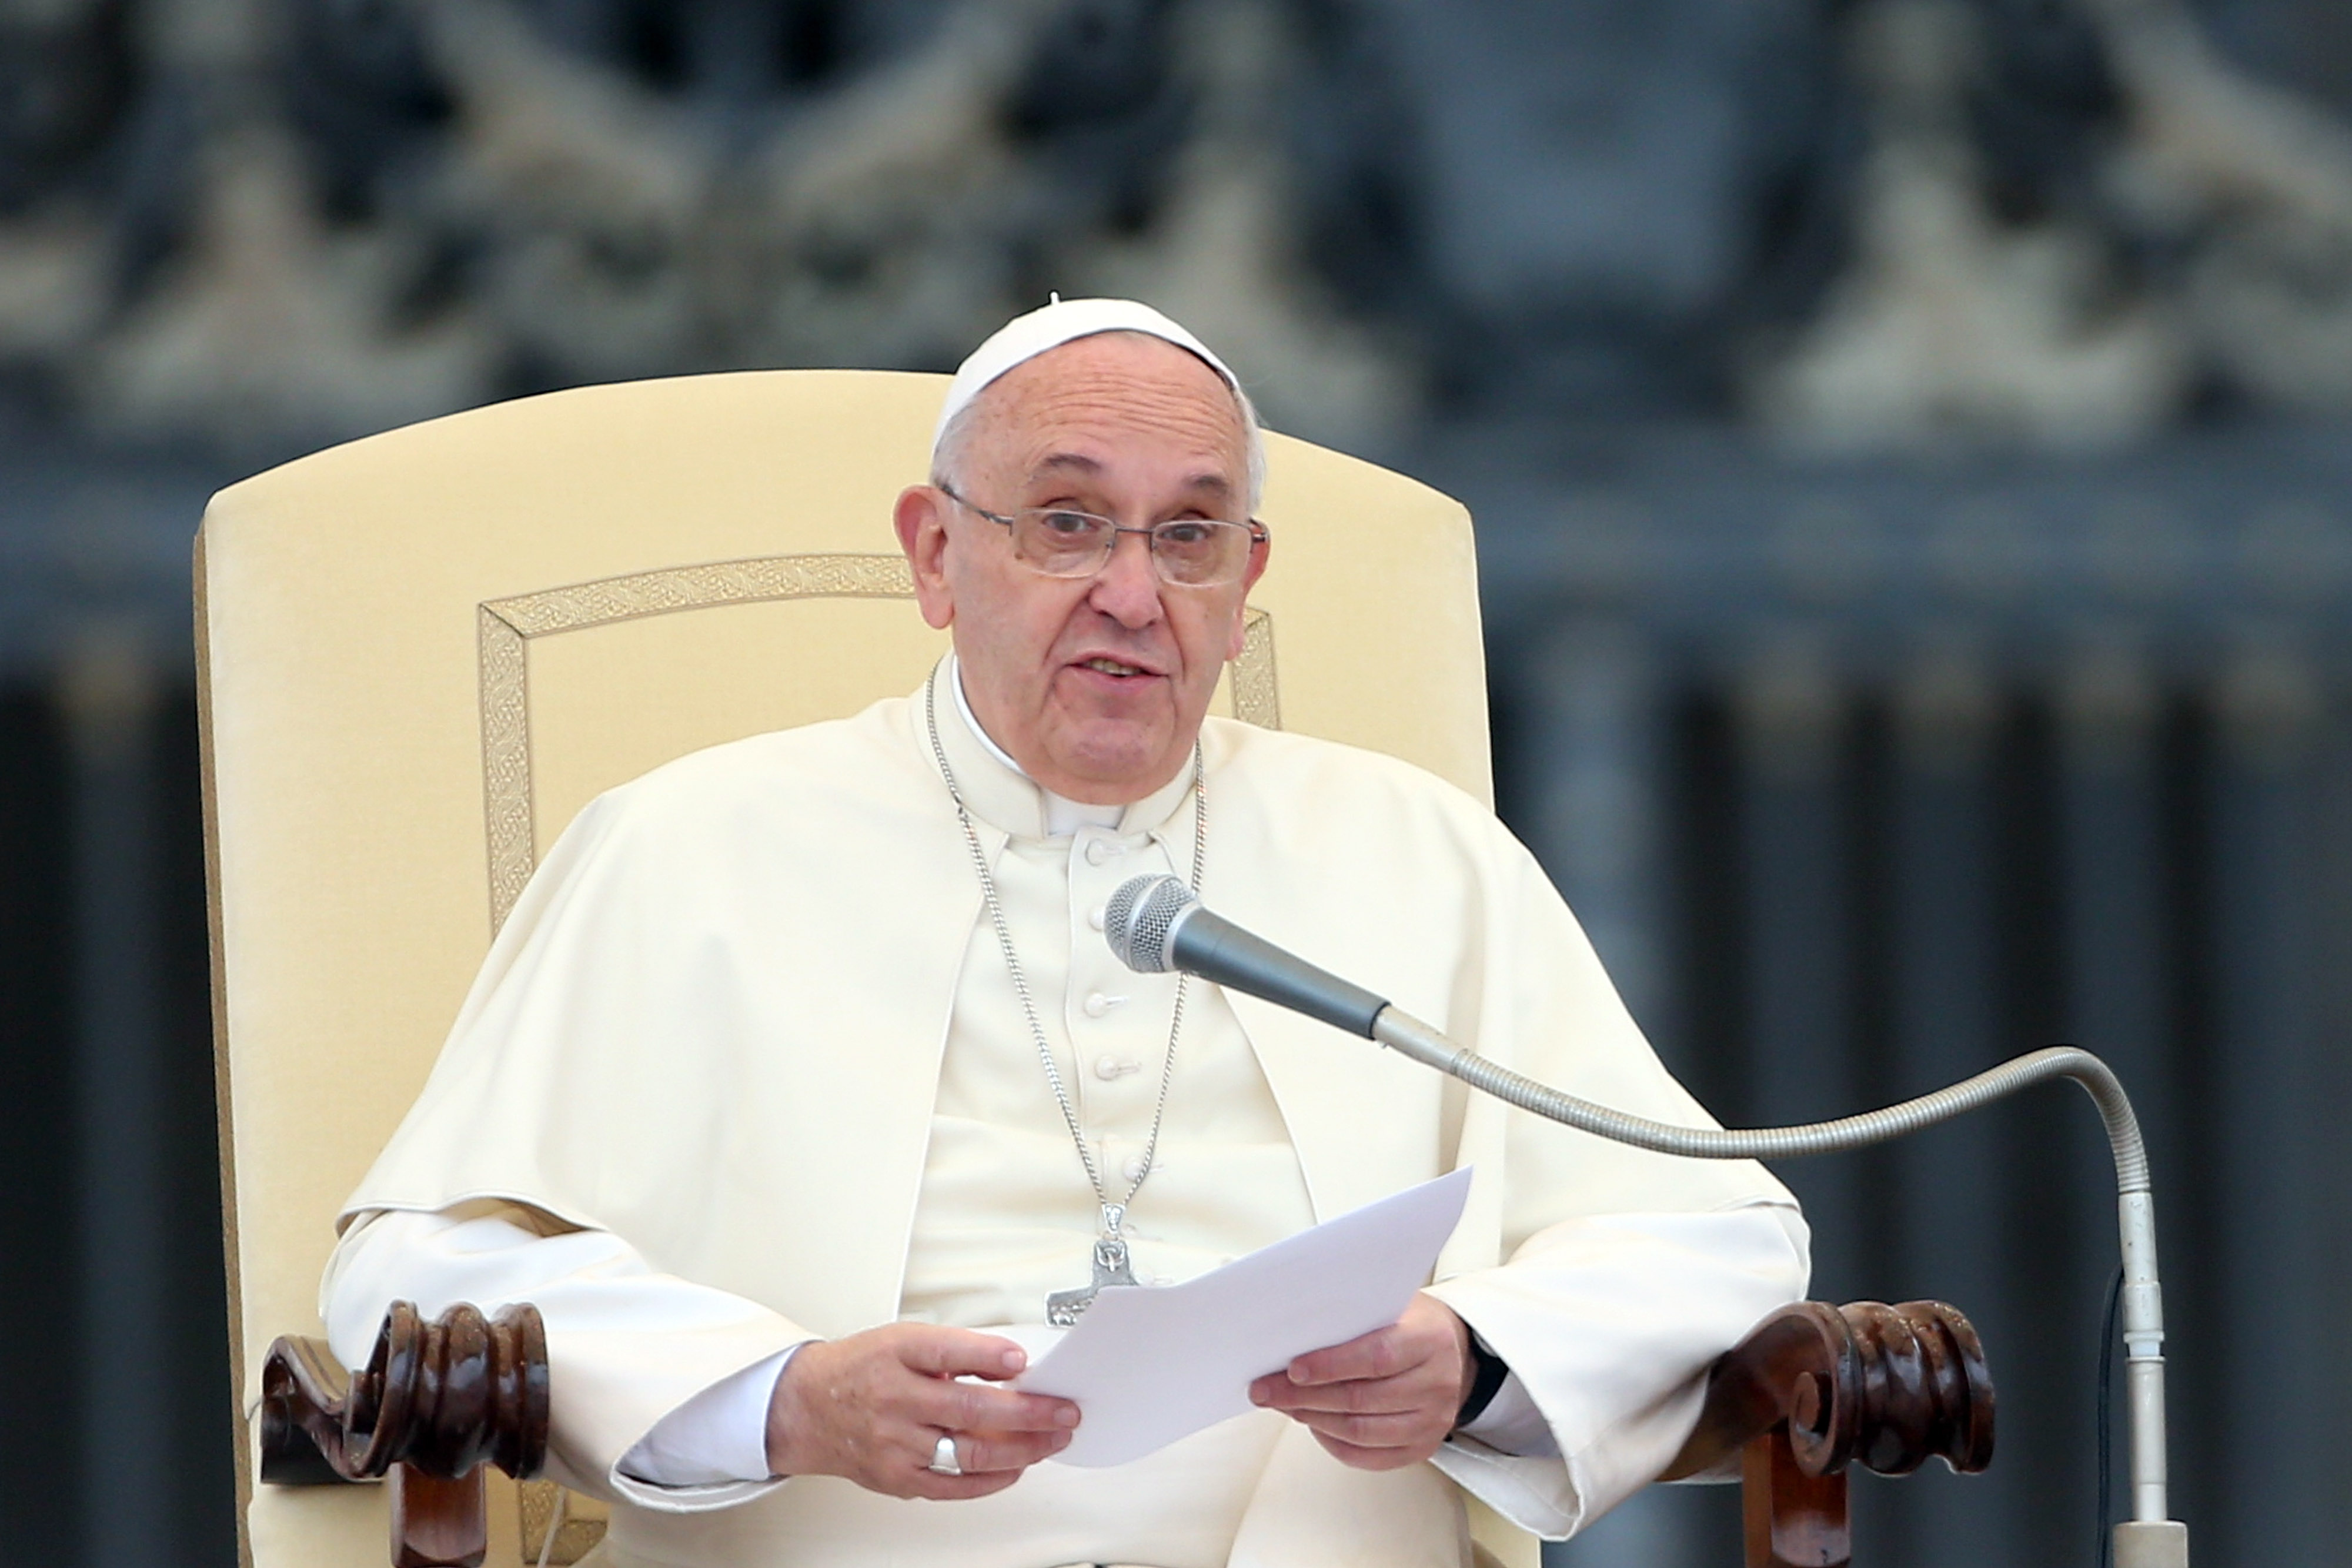 Pope Francis speaks during his weekly audience in St. Peter's square on November 12, 2014 in Vatican City, Vatican. During the event, the Pope asked the clergy to be humble, urging them to be understanding towards their communities and to avoid an authoritarian attitude. (Franco Origlia—Getty Images)